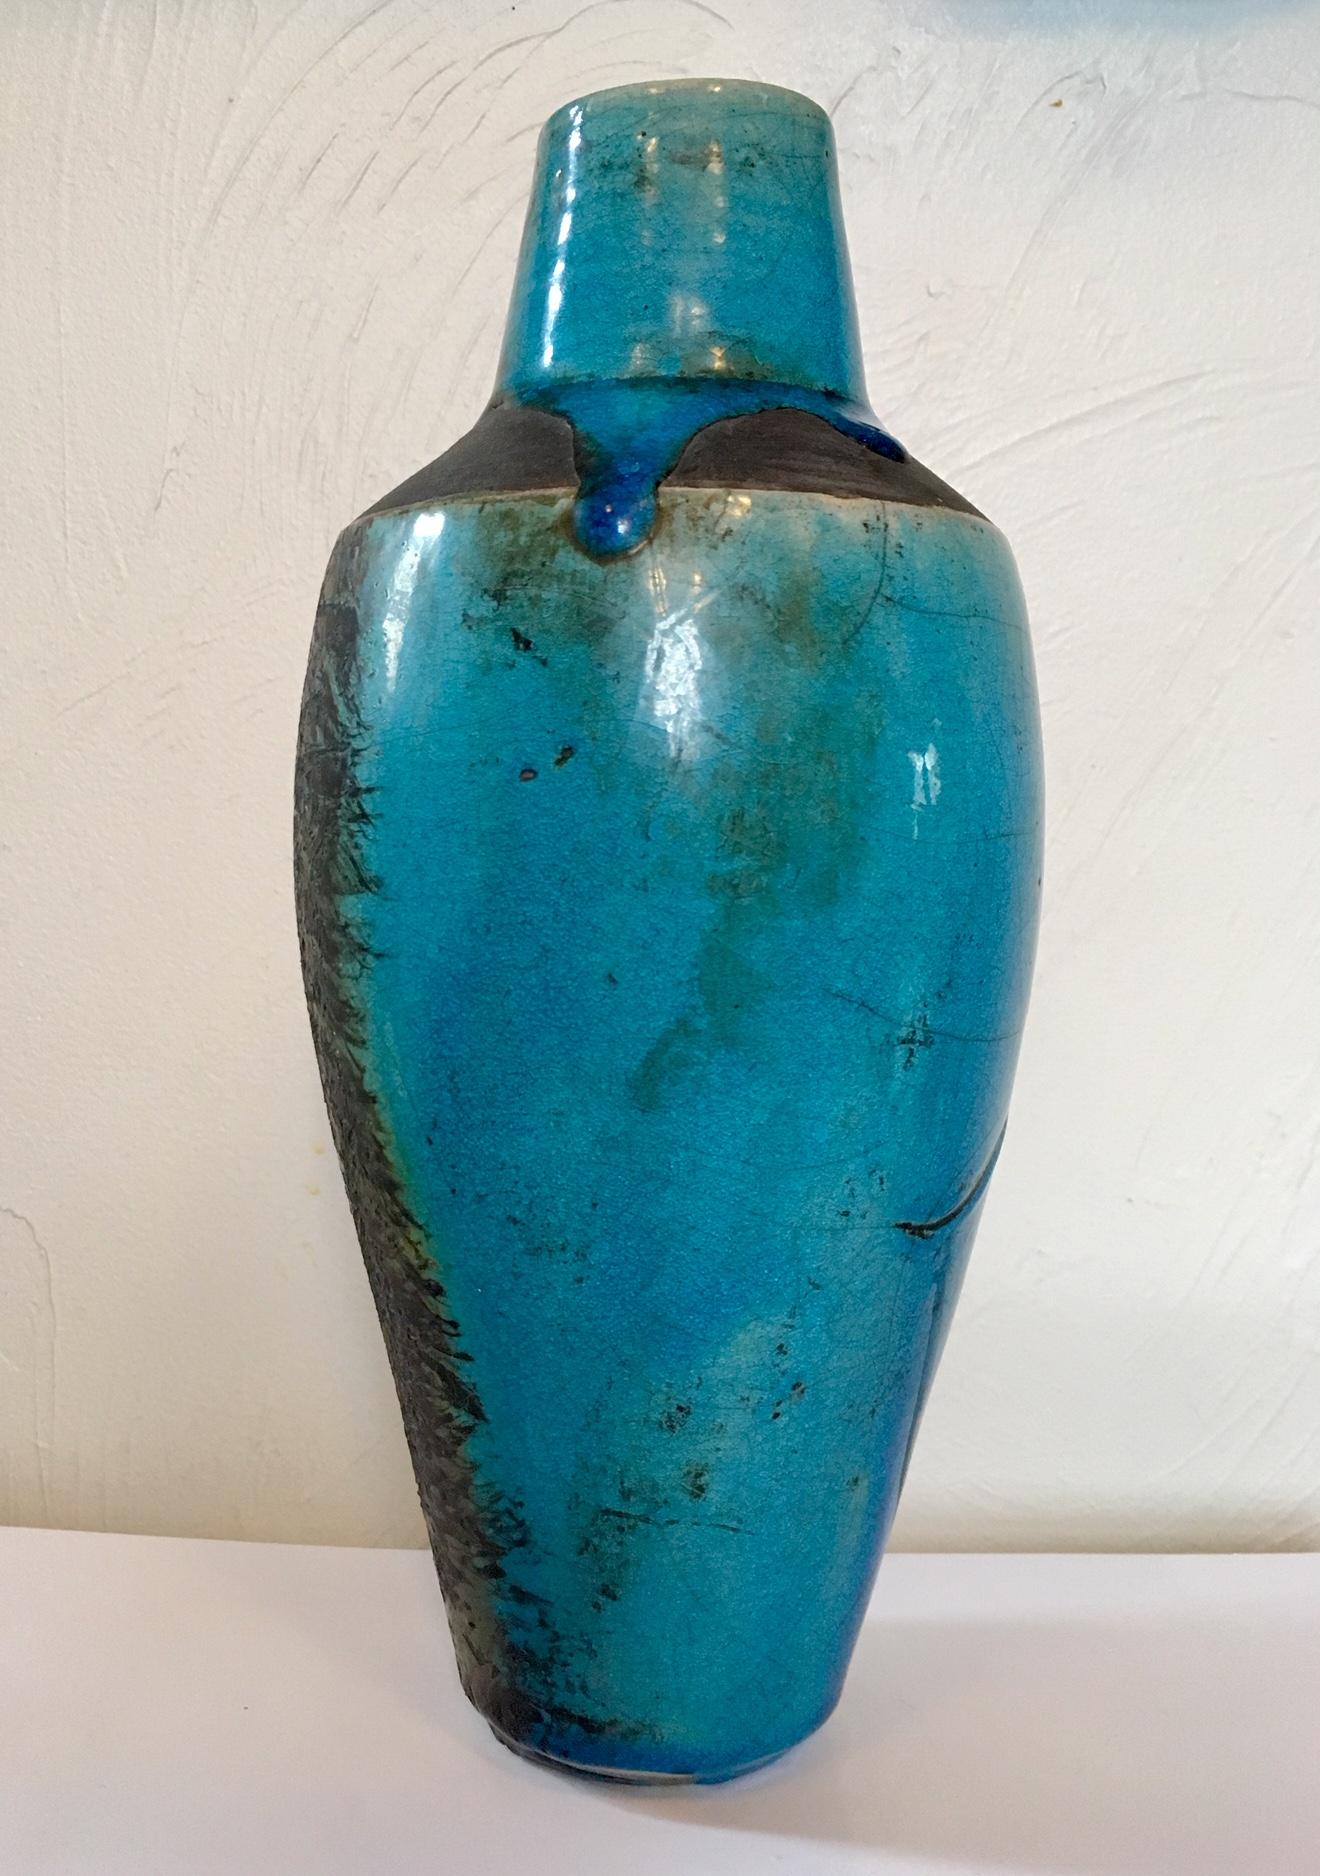 Art Studio ceramic vase, signed Jakob, circa 1980s. A hand thrown clay vase with short neck and narrow slanted shoulders above a tapering cylindrical bod; in a turquoise hue under clear crazed glaze, with black bisque shoulders, a black textured